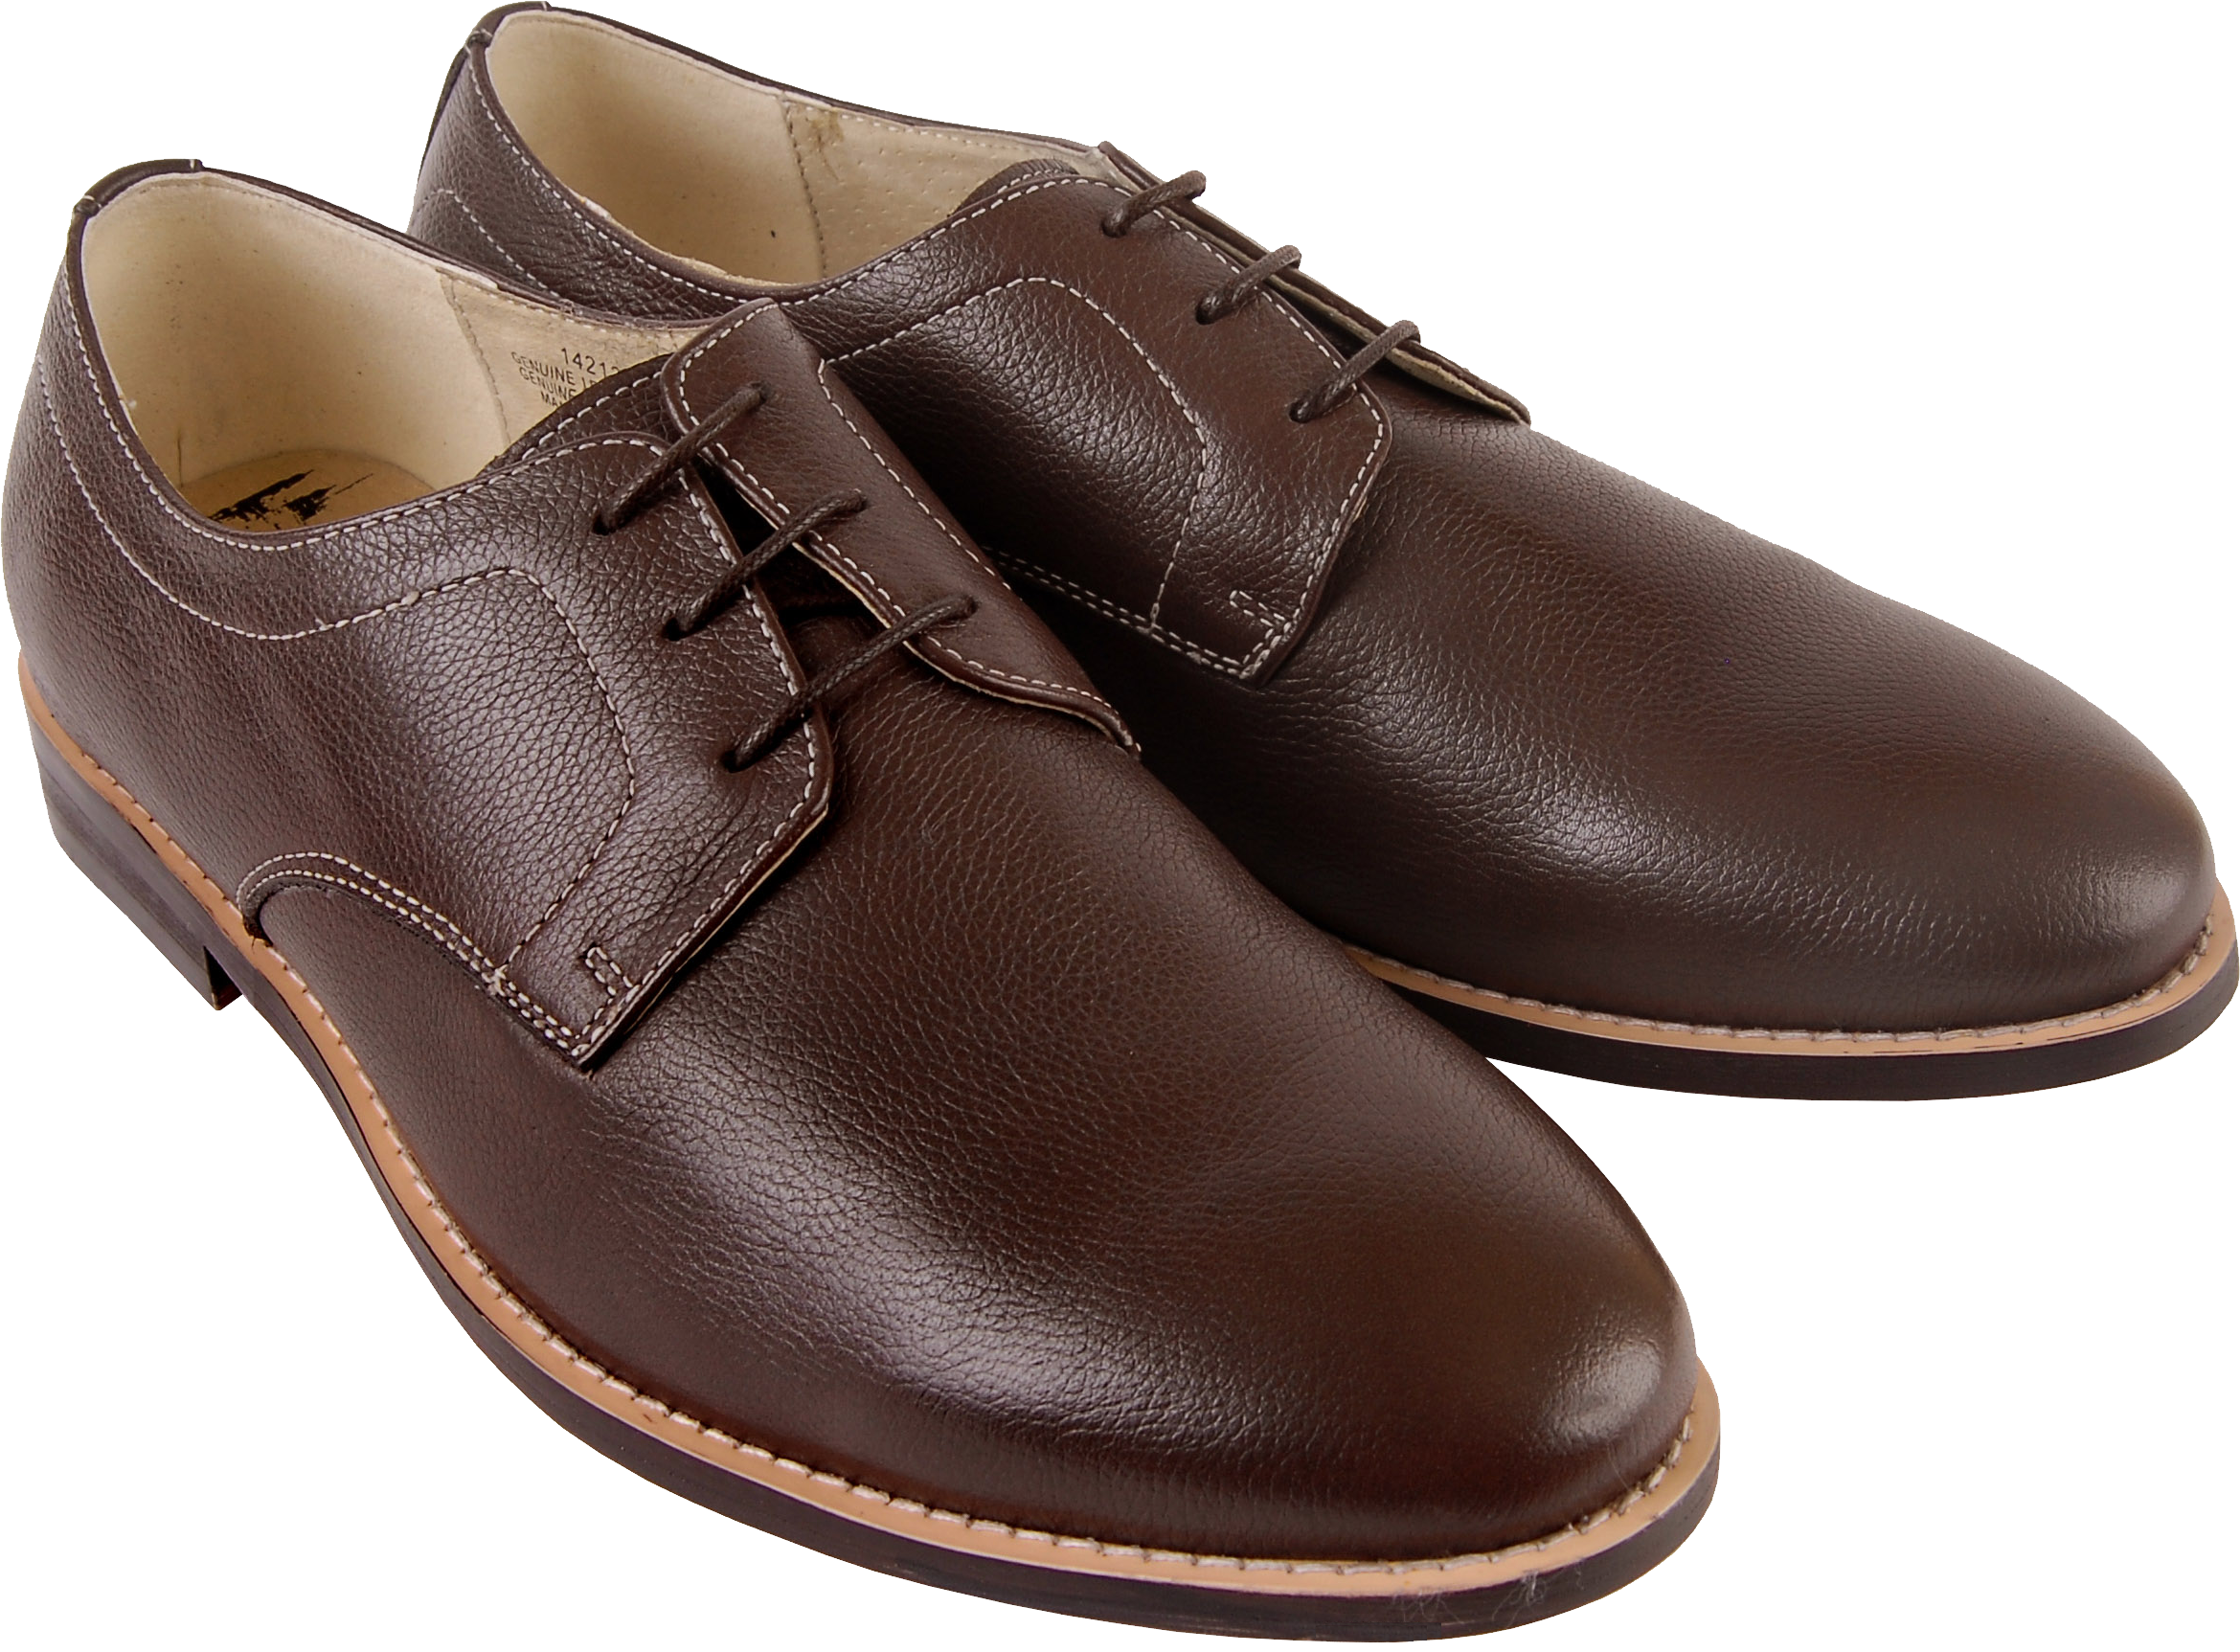 Chaussures homme marron